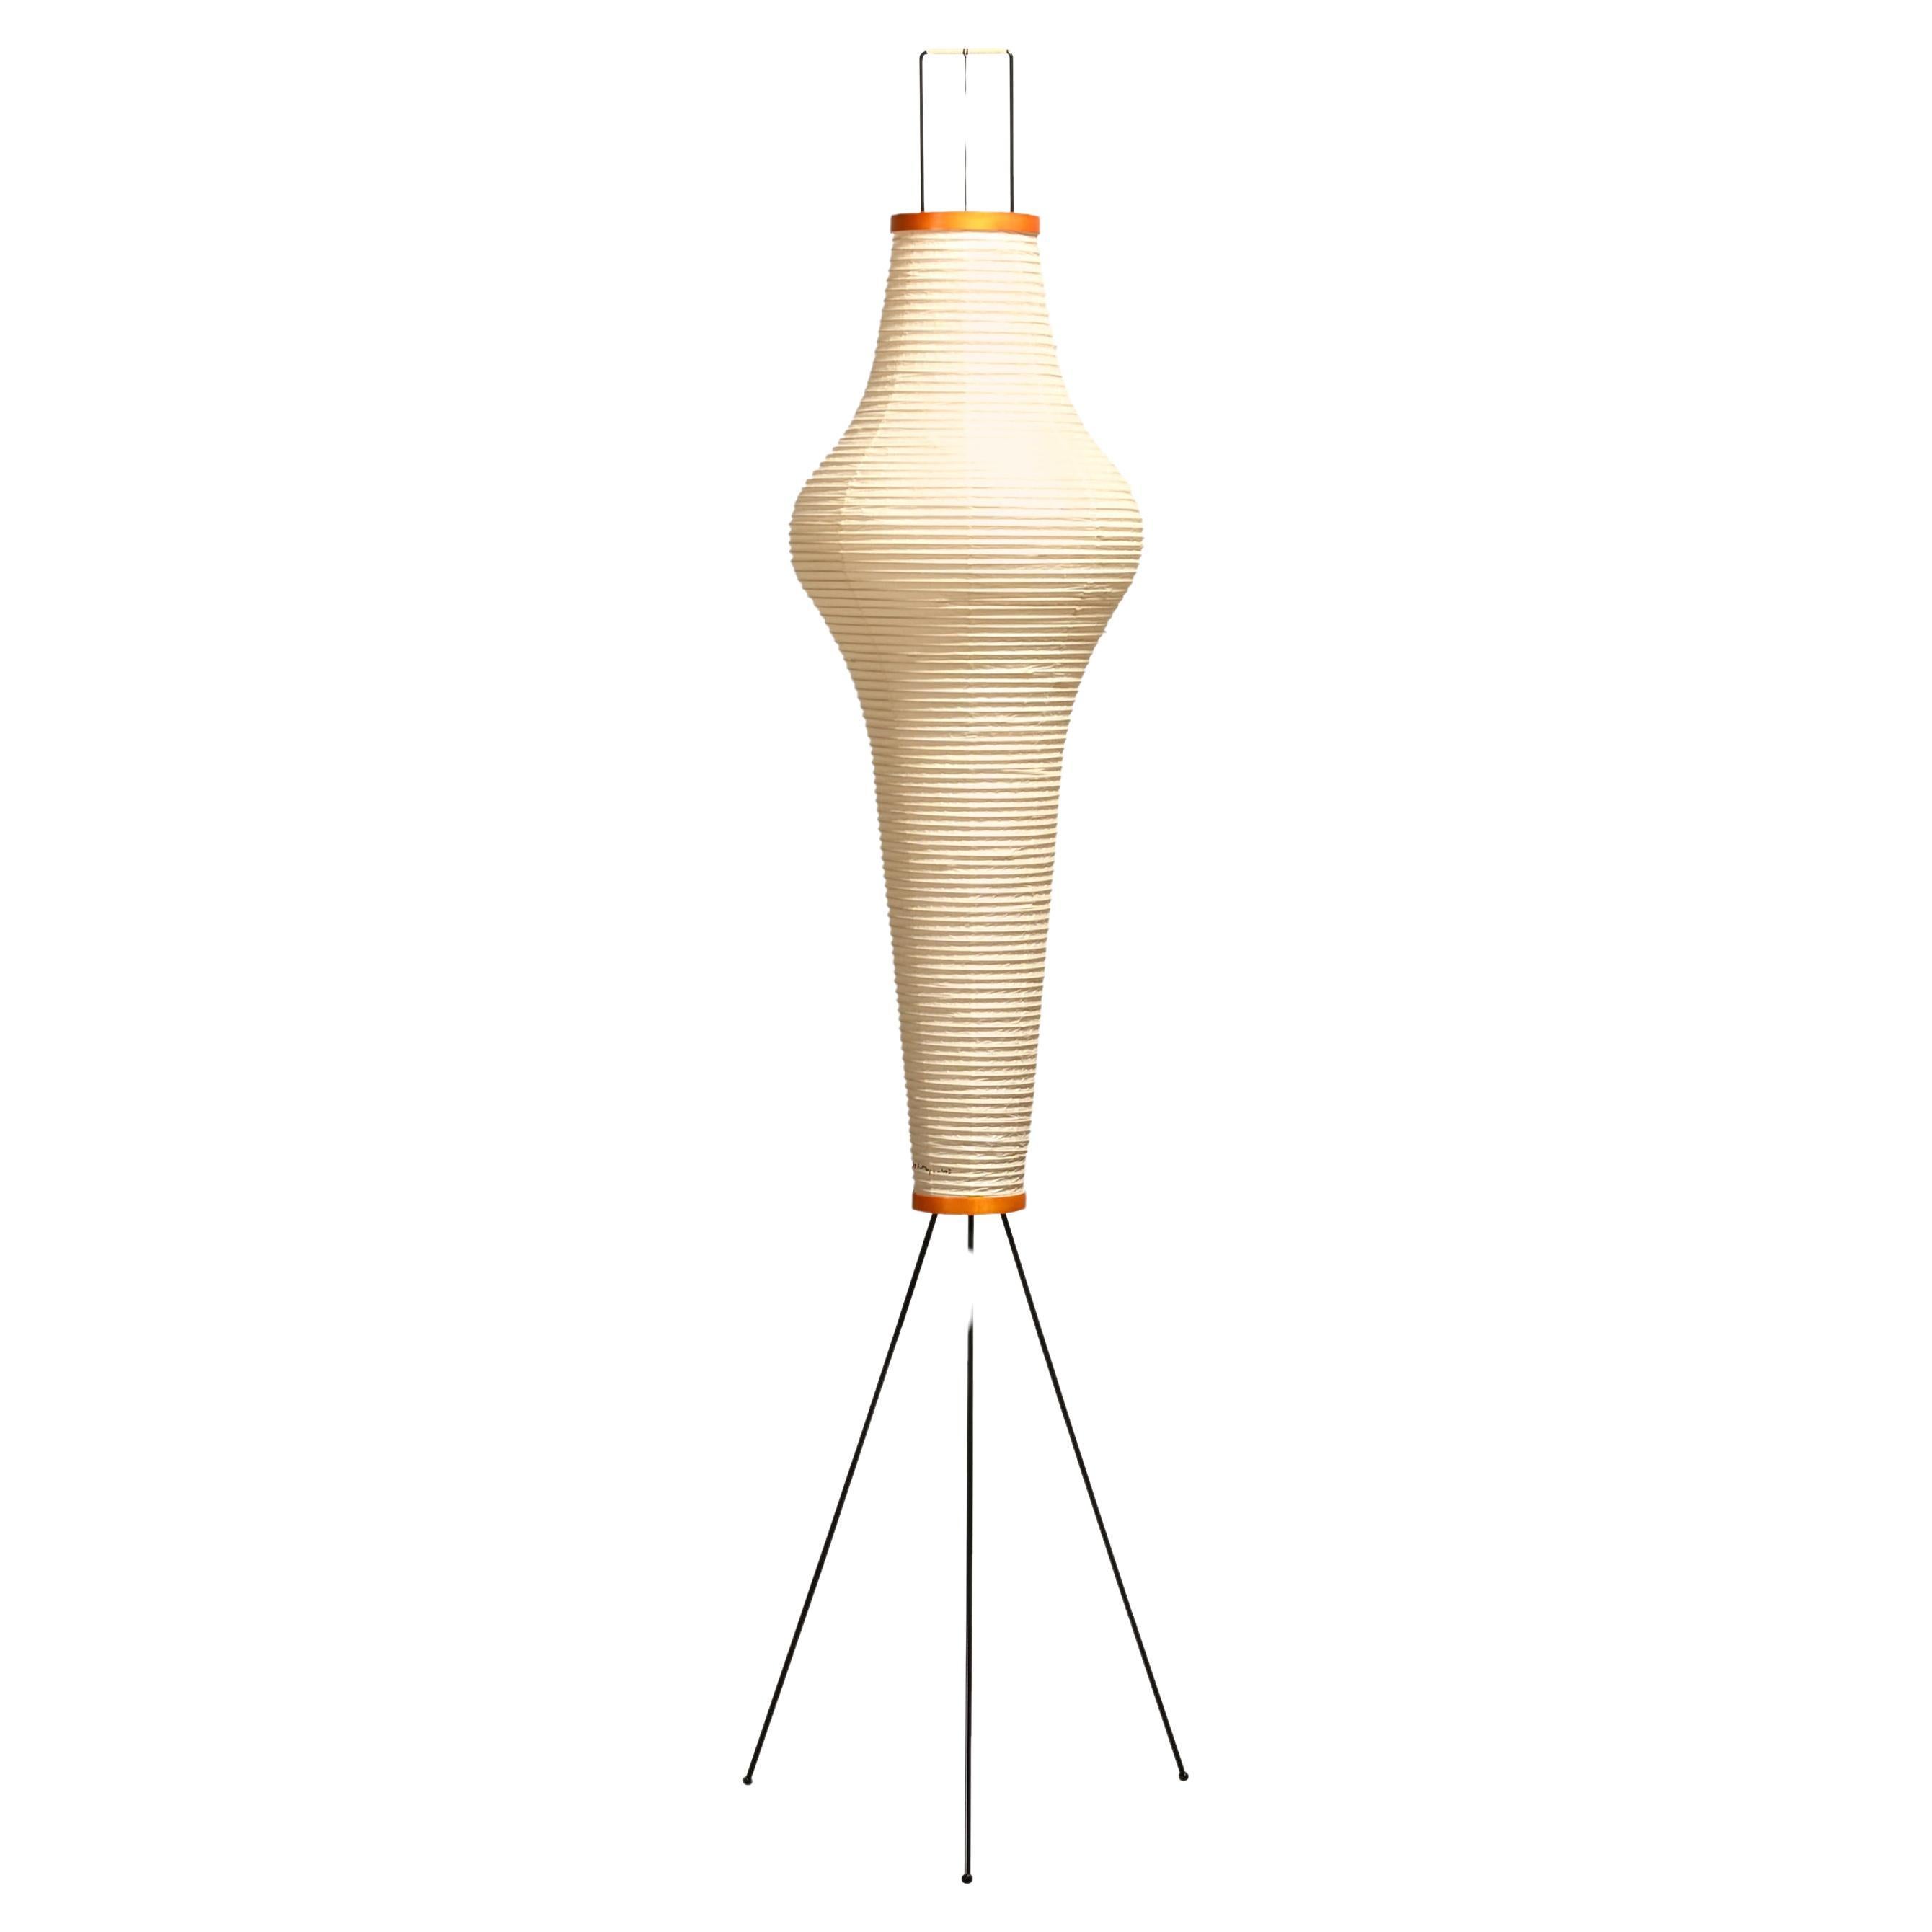 Isamu Noguchi Akari Model 14A Light Sculpture in Washi Paper and Bamboo by Ozeki For Sale